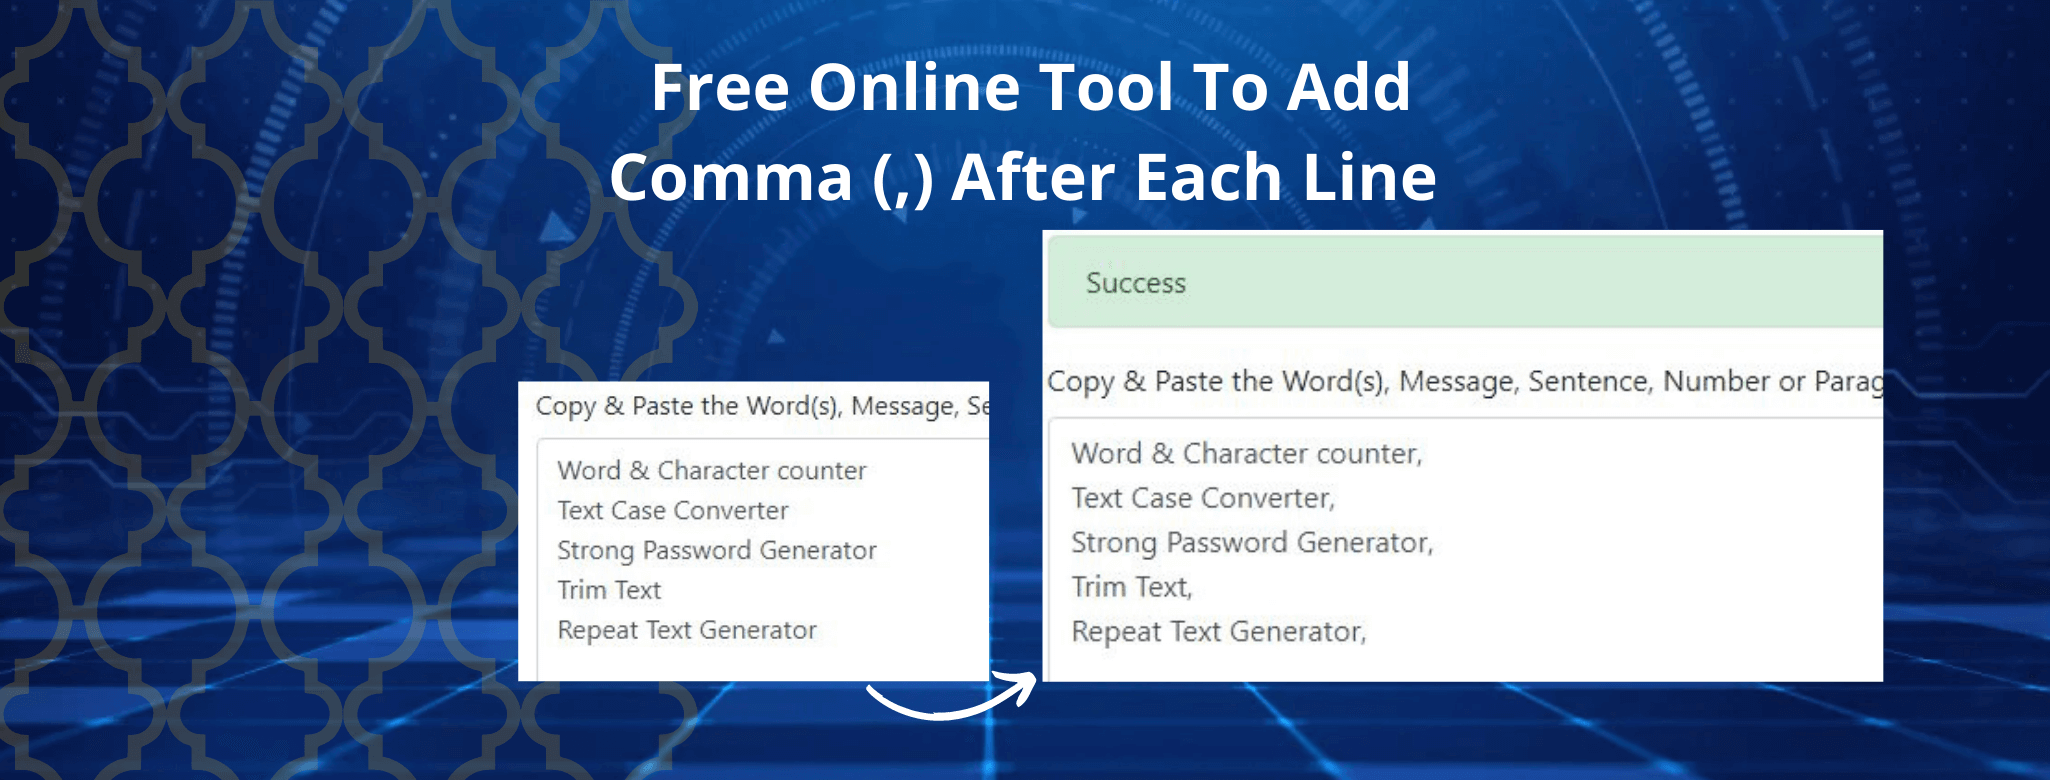 Add Comma, Free Online Tool To Add Comma After Each Line Numbers